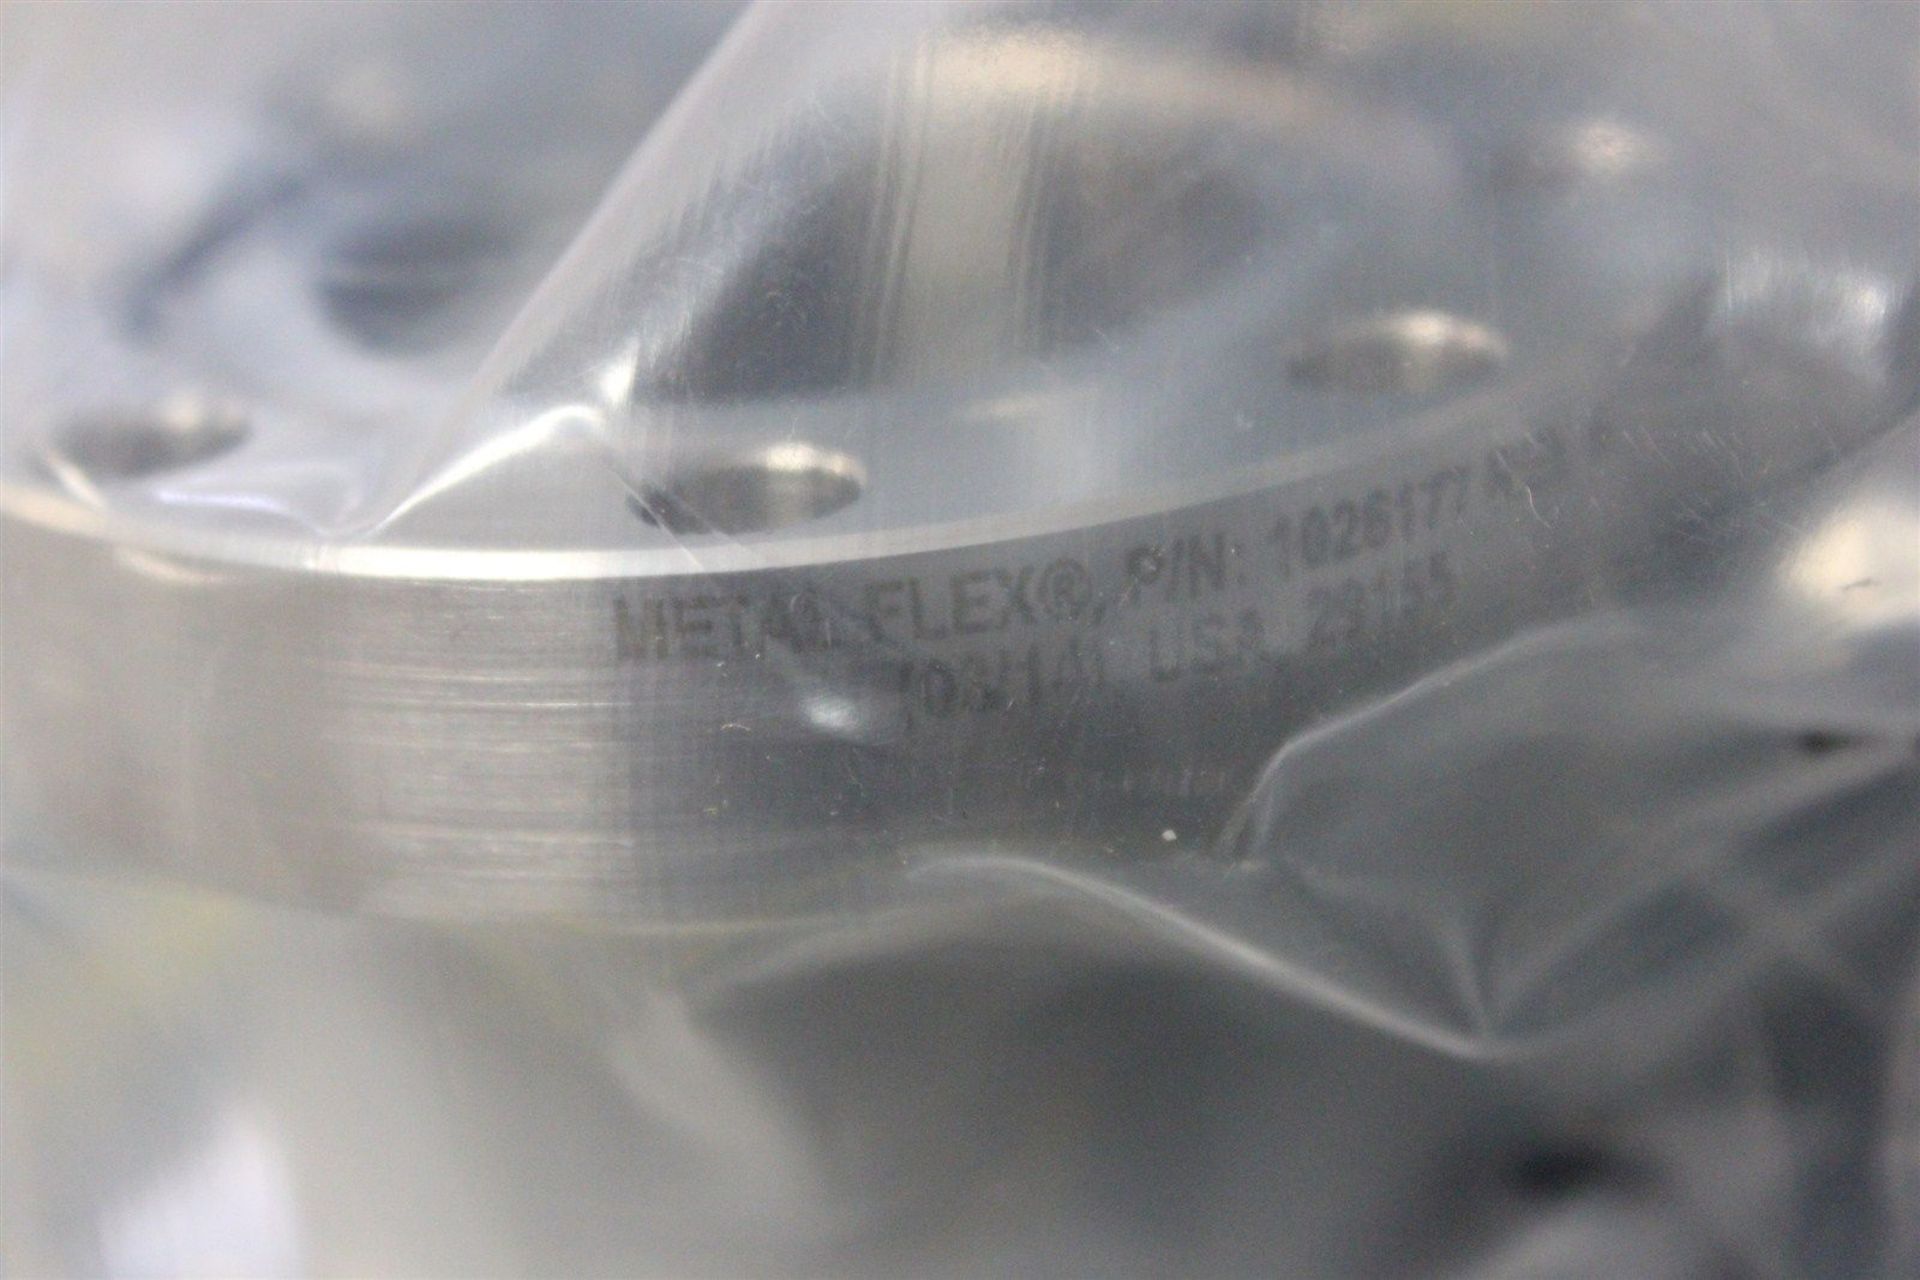 NEW METAL FLEX 3 3/8" STAINLESS STEEL HIGH VACUUM WELDED BELLOWS TUBE FITTING - Image 5 of 8